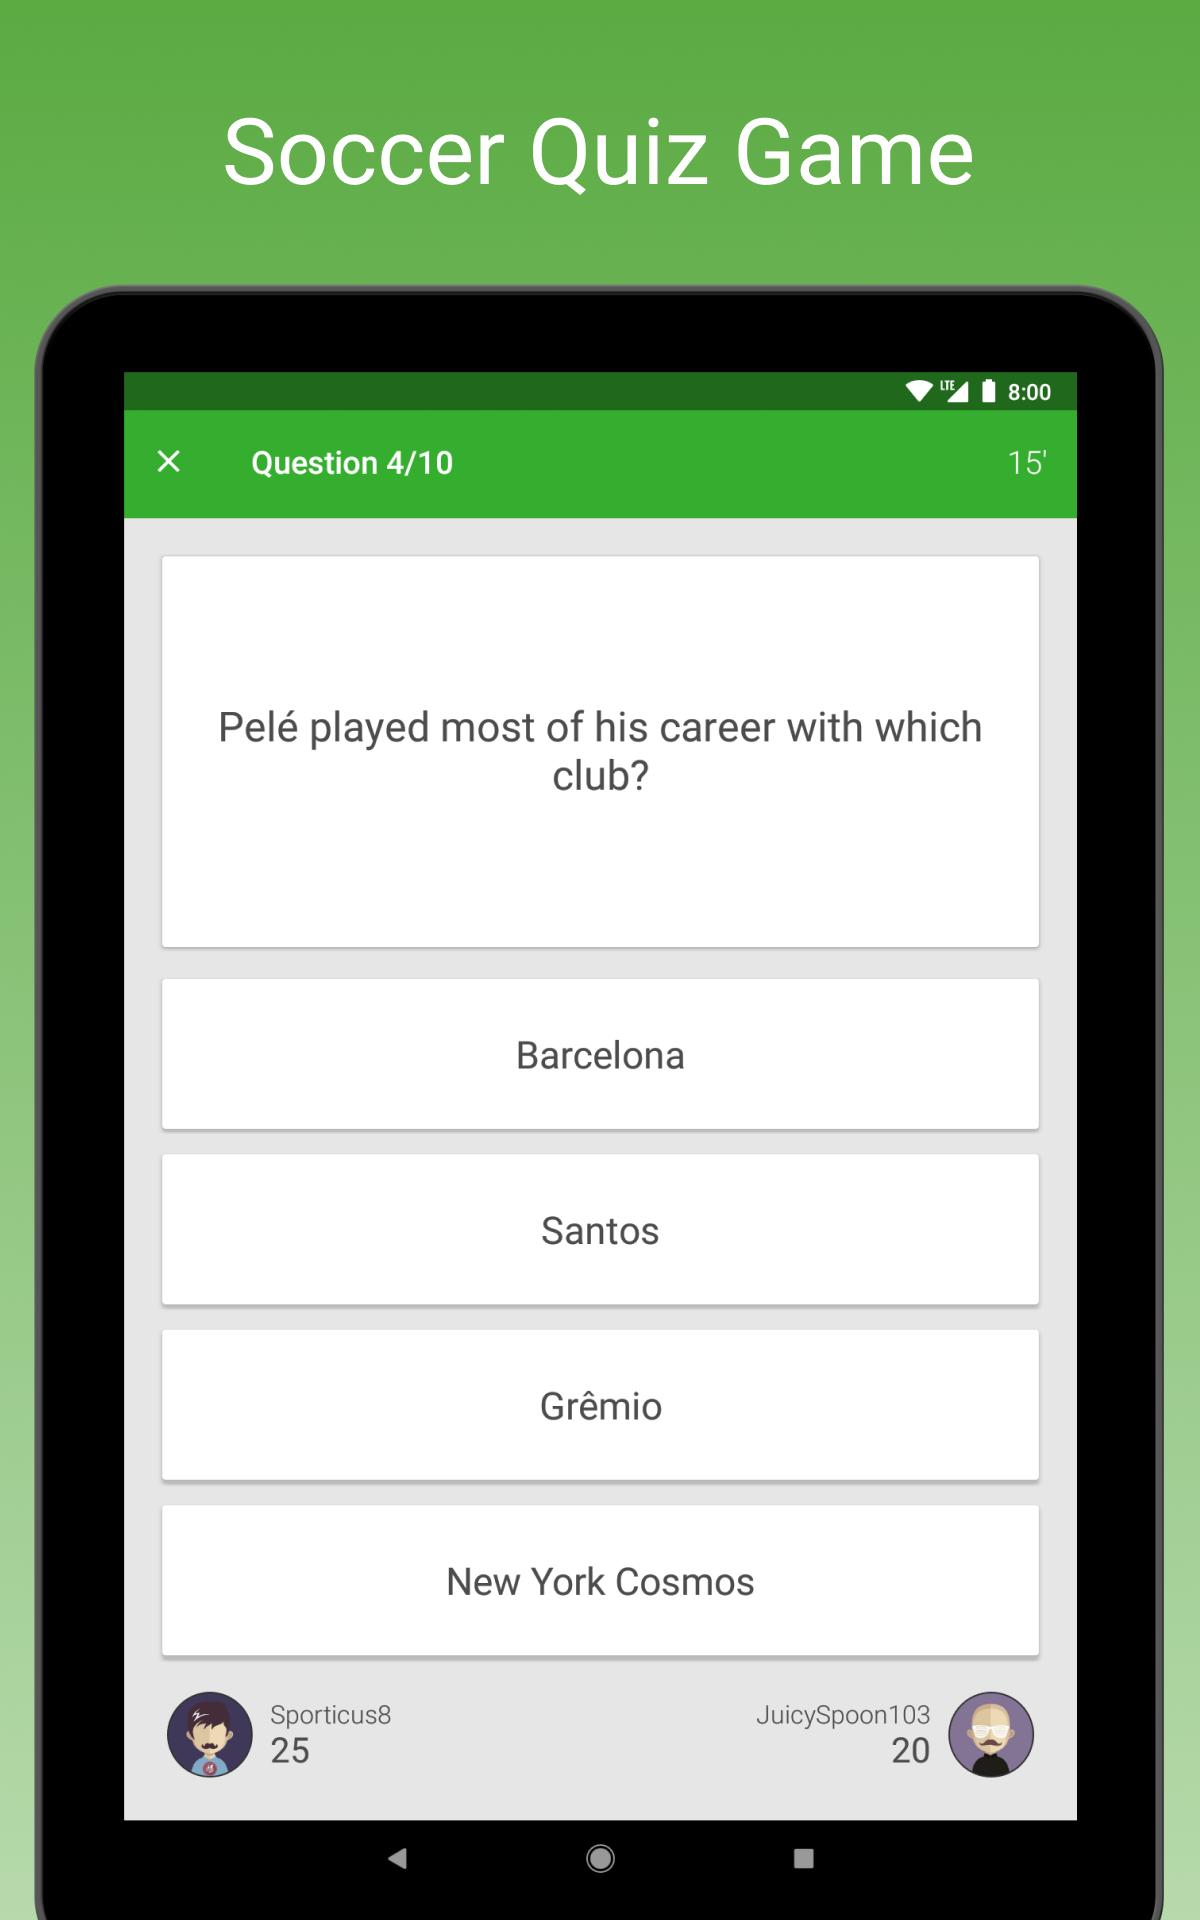 Quigle - Google Feud + Quiz for Android - Free App Download